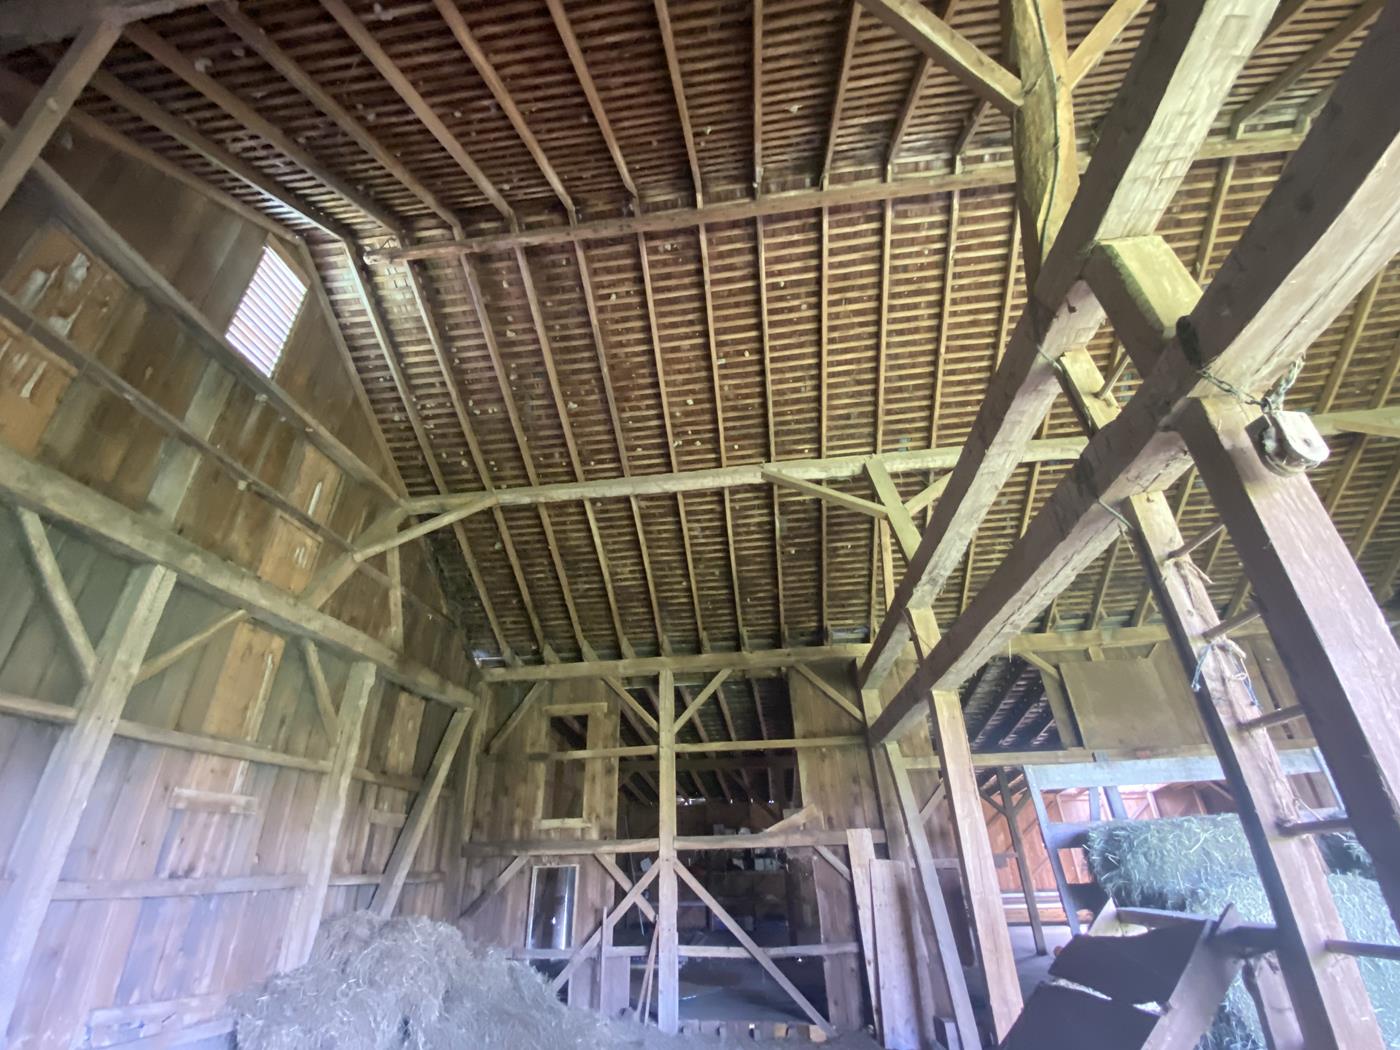 https://www.ohiovalleybarnsalvage.com/images/Marlatt Historic Ohio Barn Frame For Sale - Your Source For Hand-Hewn Two-Sided Sleepers